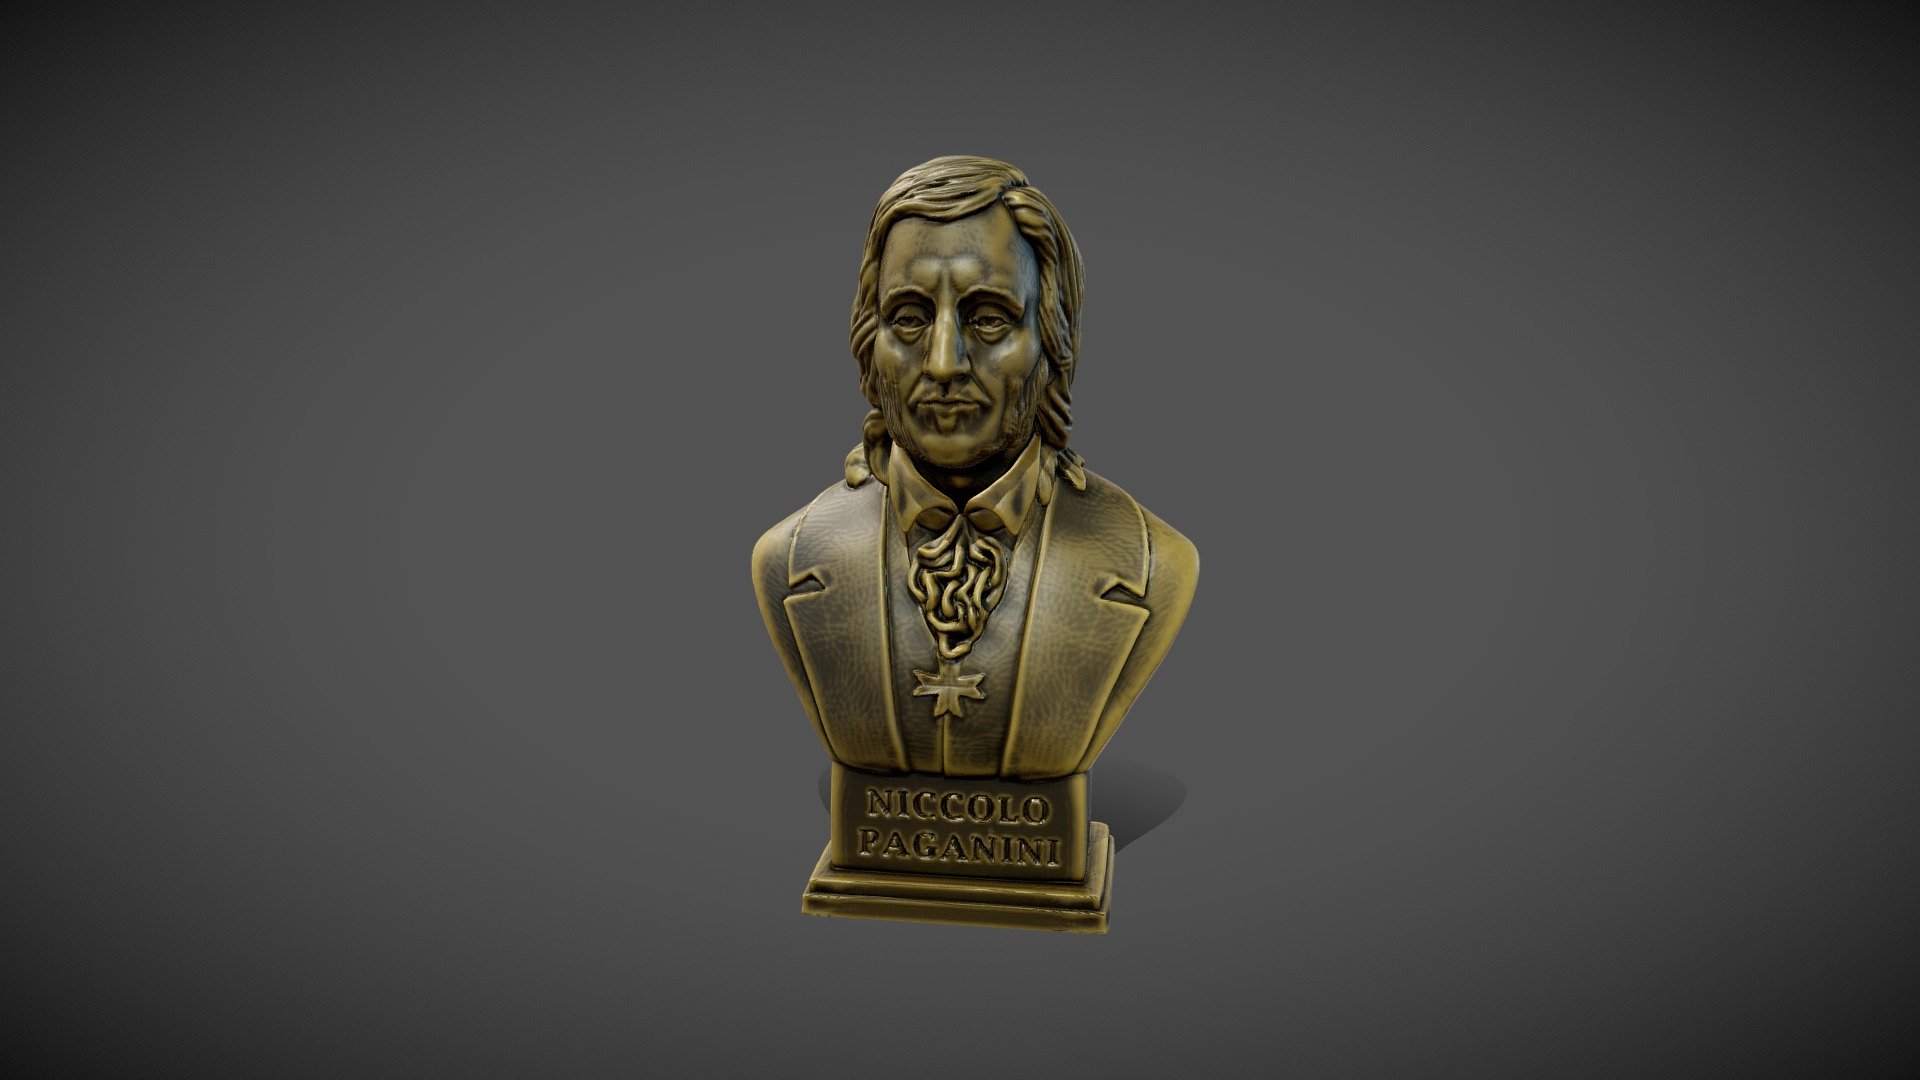 Bust of Niccolo Paganini For 3D printing

Modeled in zbrush for 3D printing, a solid model is provided in stl format, also in OBJ and FBX formats with textures and UV maps to enable its use in applications other than 3D printing.

Niccolò Paganini was an Italian composer. He is considered one of the archetypes of violin virtuosity and one of the greatest representatives of the instrumental movement of Romanticism 3d model